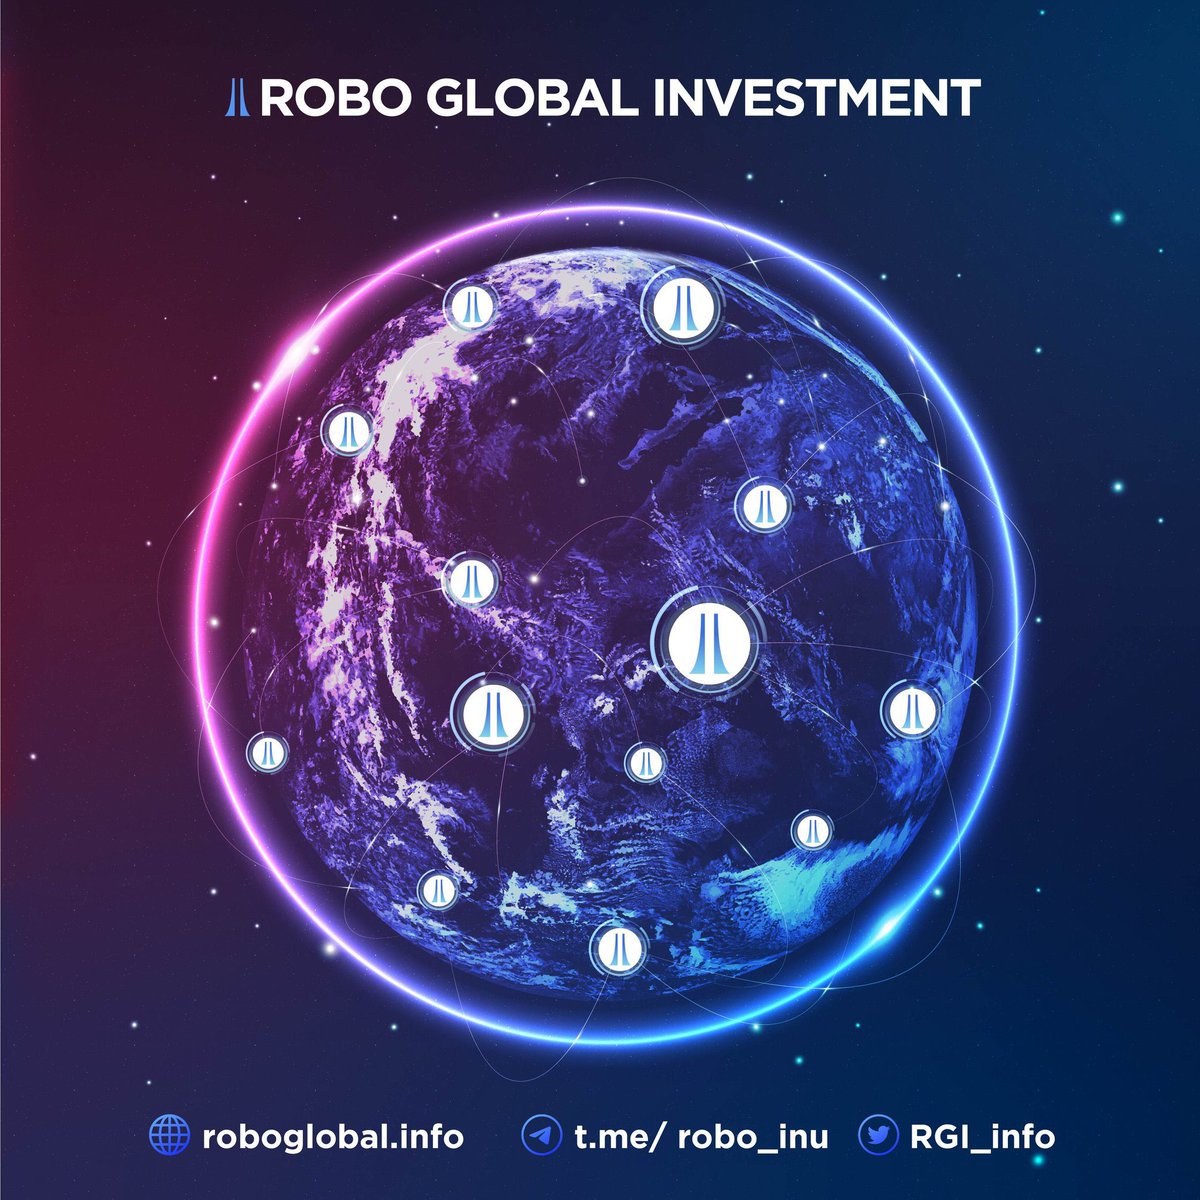 Inspired by NASA's plan to launch Robo-dogs to Mars, we at ROBO INU FINANCE are aiming to create an efficient circular ecosystem that combines the best fintech resources. Join us and become part of something revolutionary. #RoboInuFinance #FintechRevolution #JoinUs #RBIF